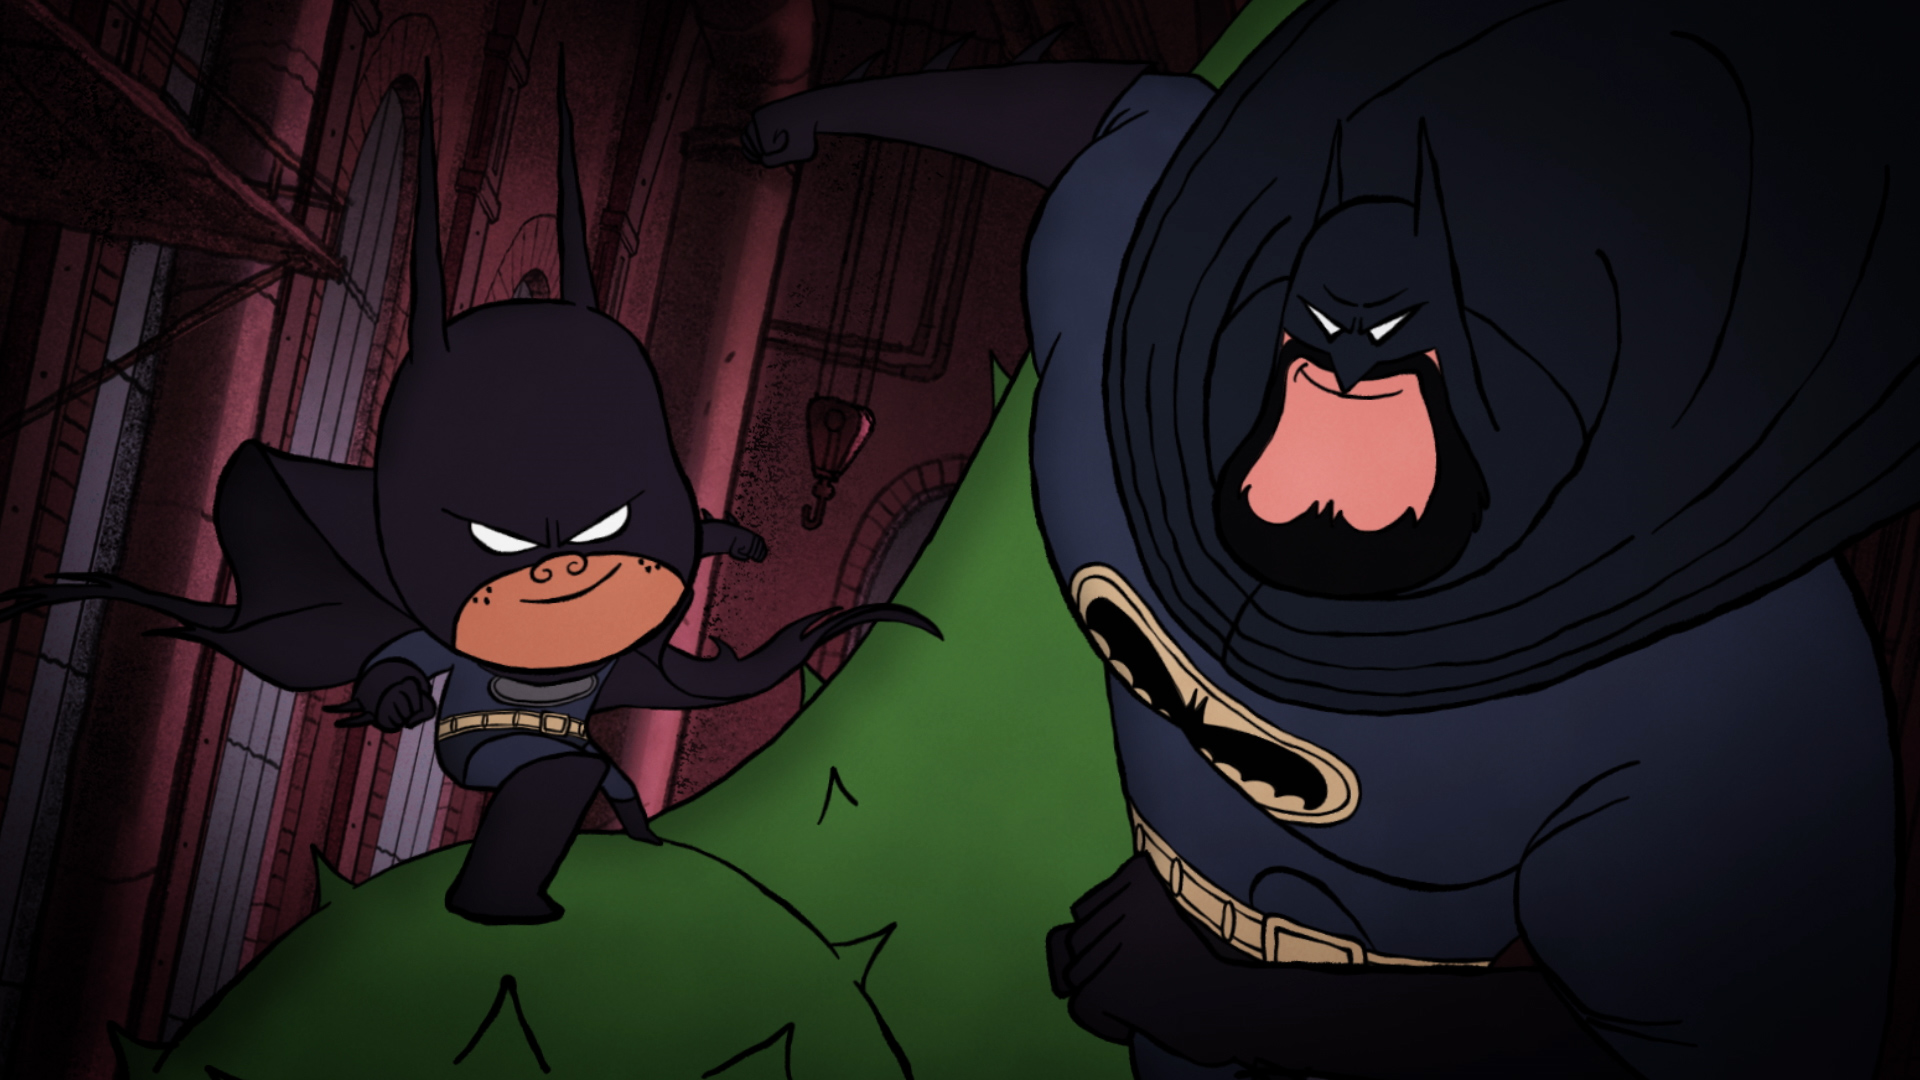 Merry Little Batman | Mike Roth on a New Animated Christmas Film with DC Characters